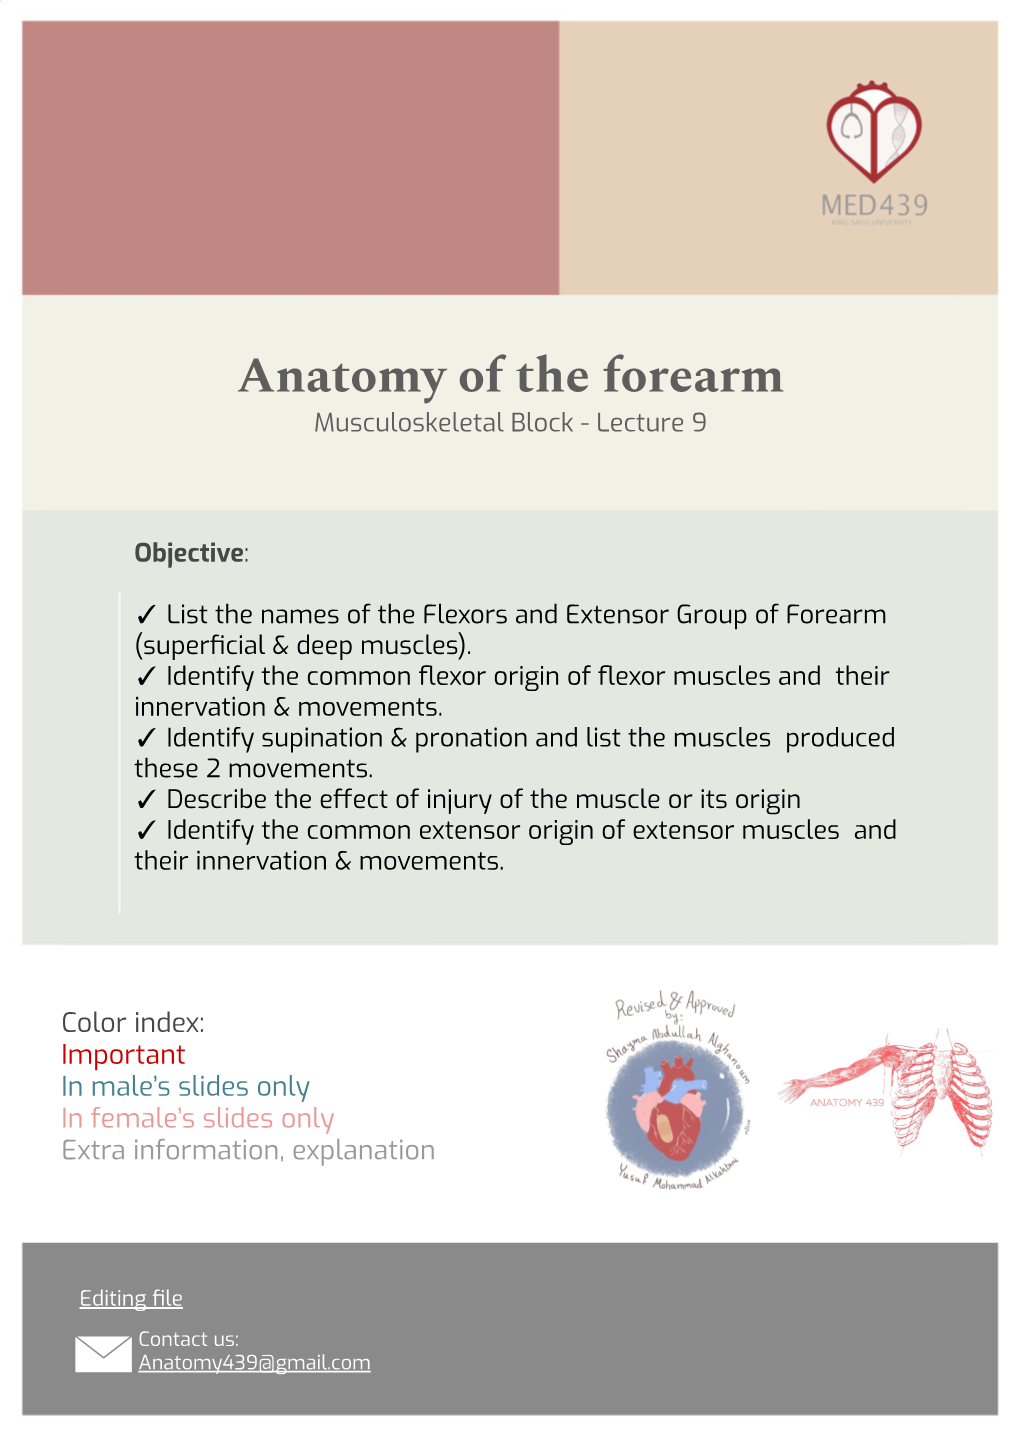 Anatomy of the Forearm Musculoskeletal Block - Lecture 9